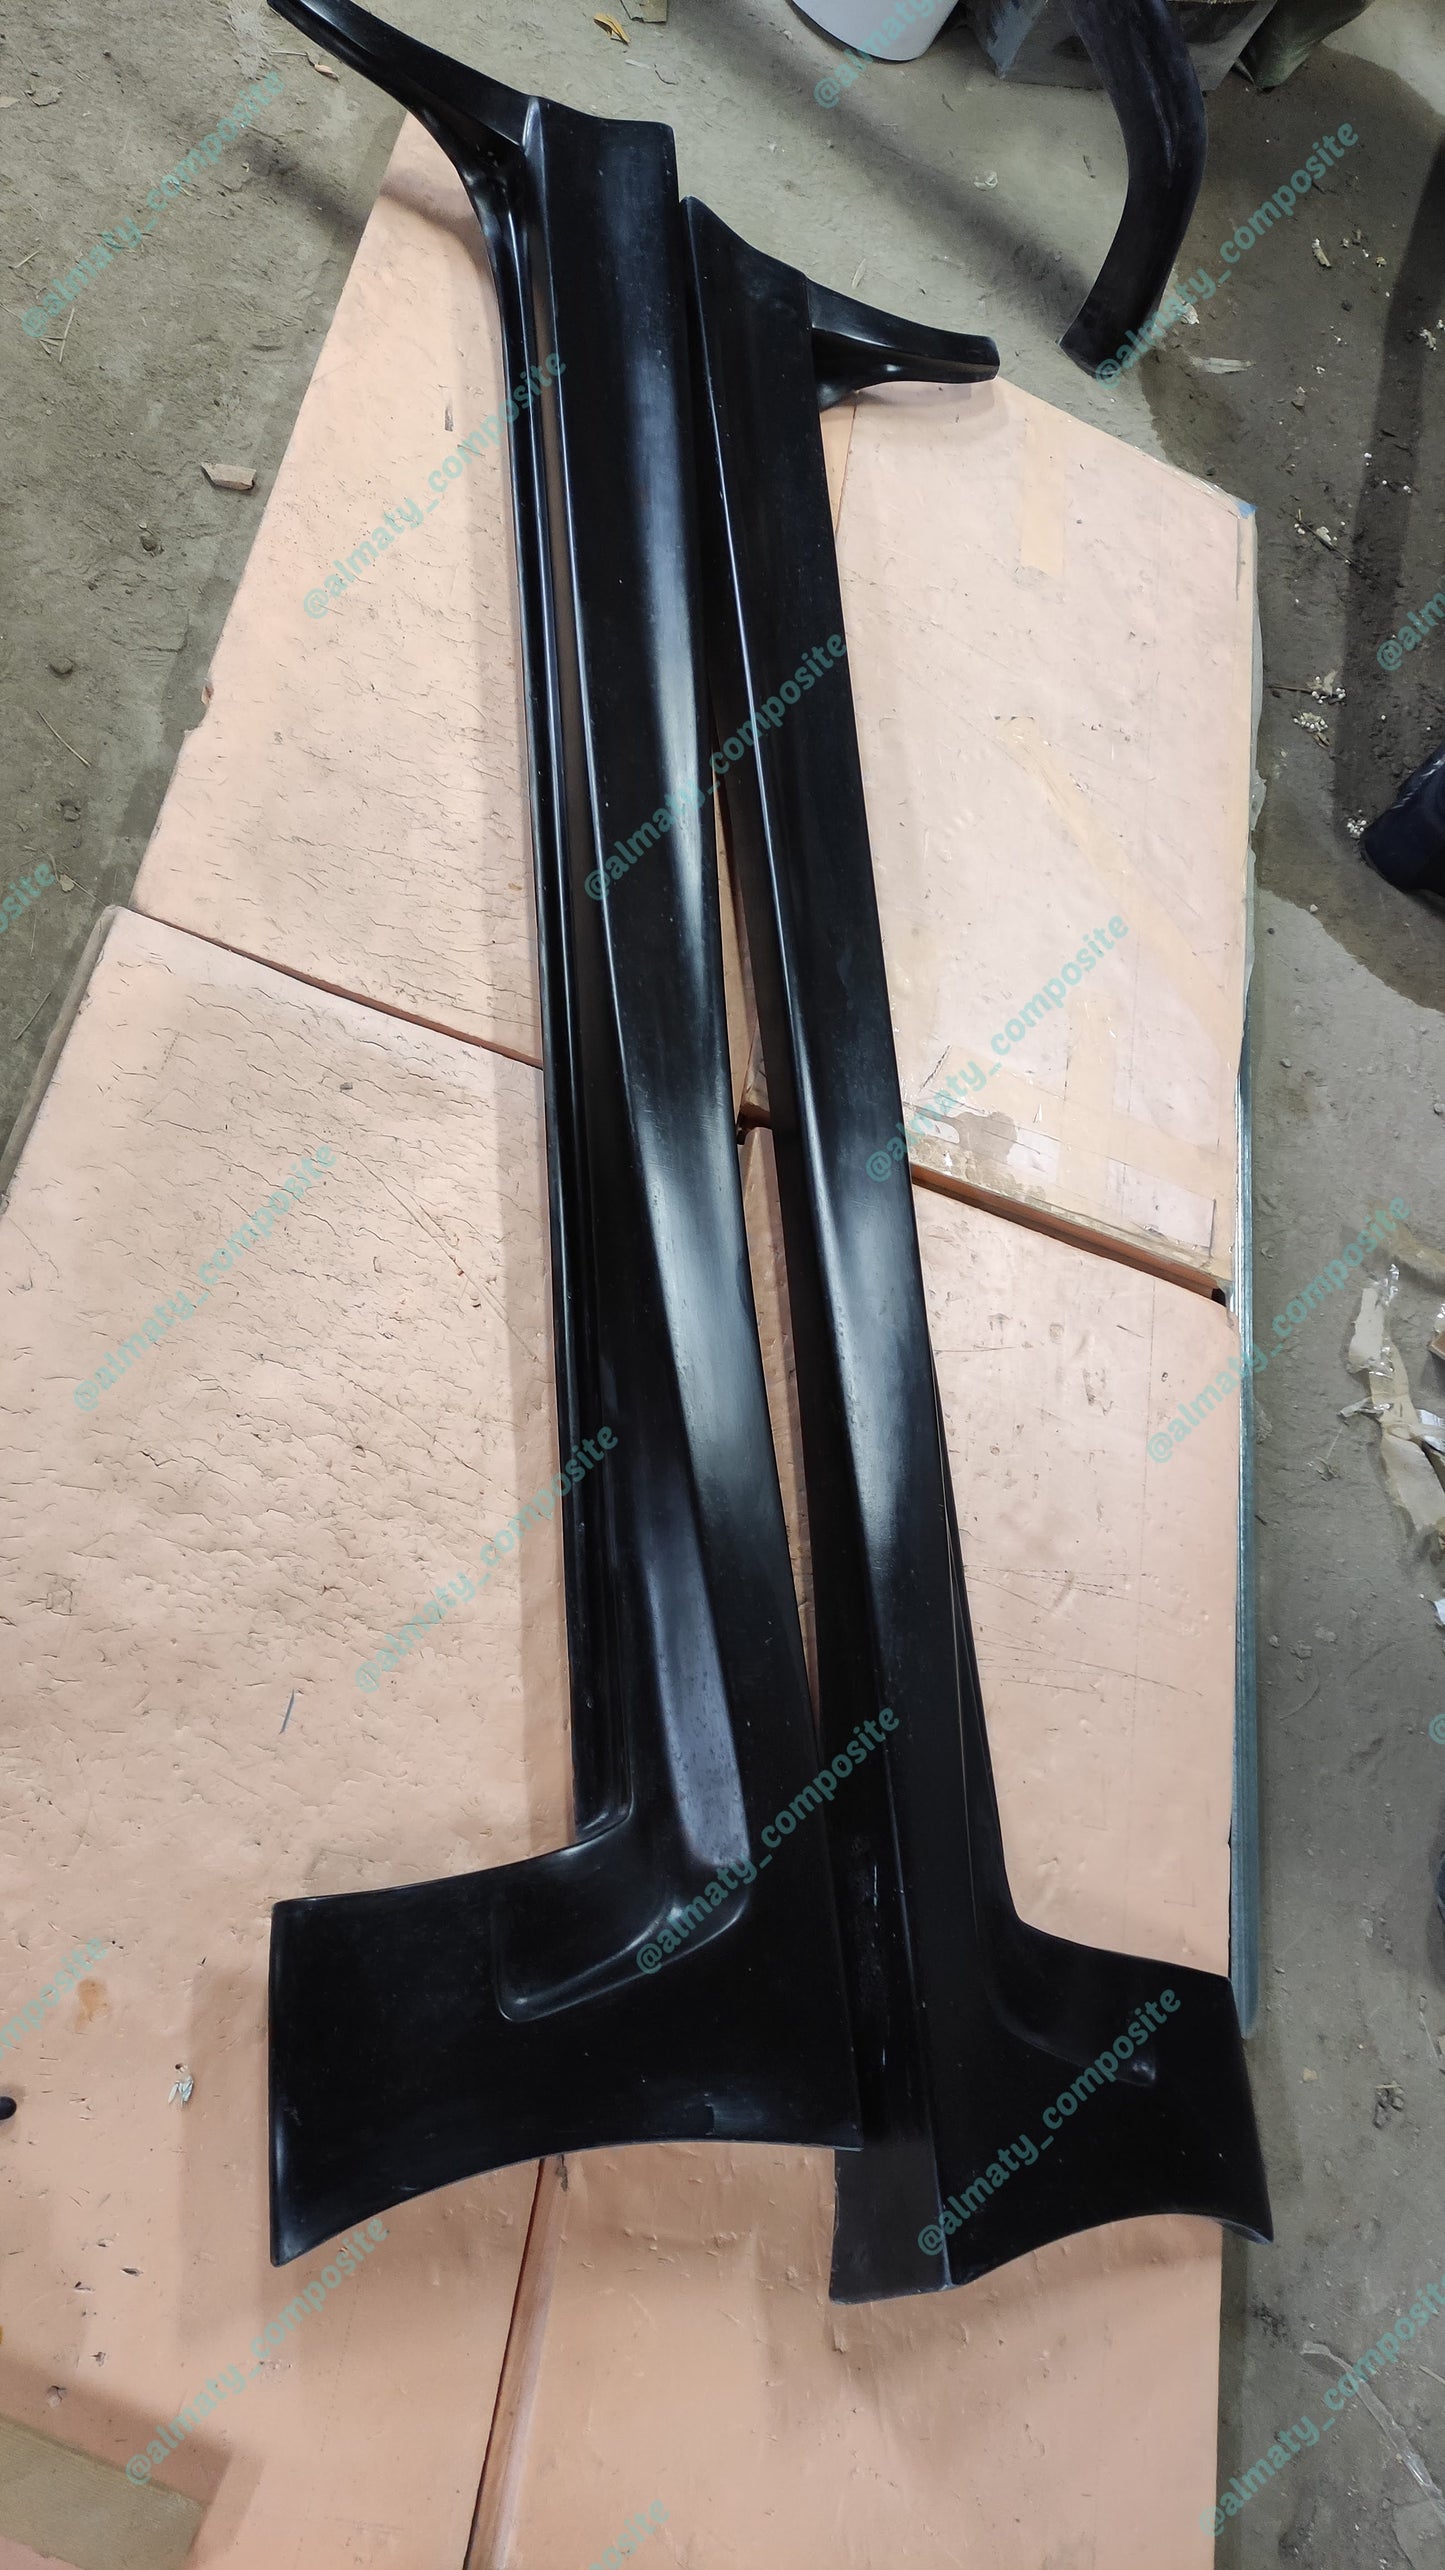 Side Skirts Admiration for Totoya Aristo gs300 jzs147 Tuning [AC]